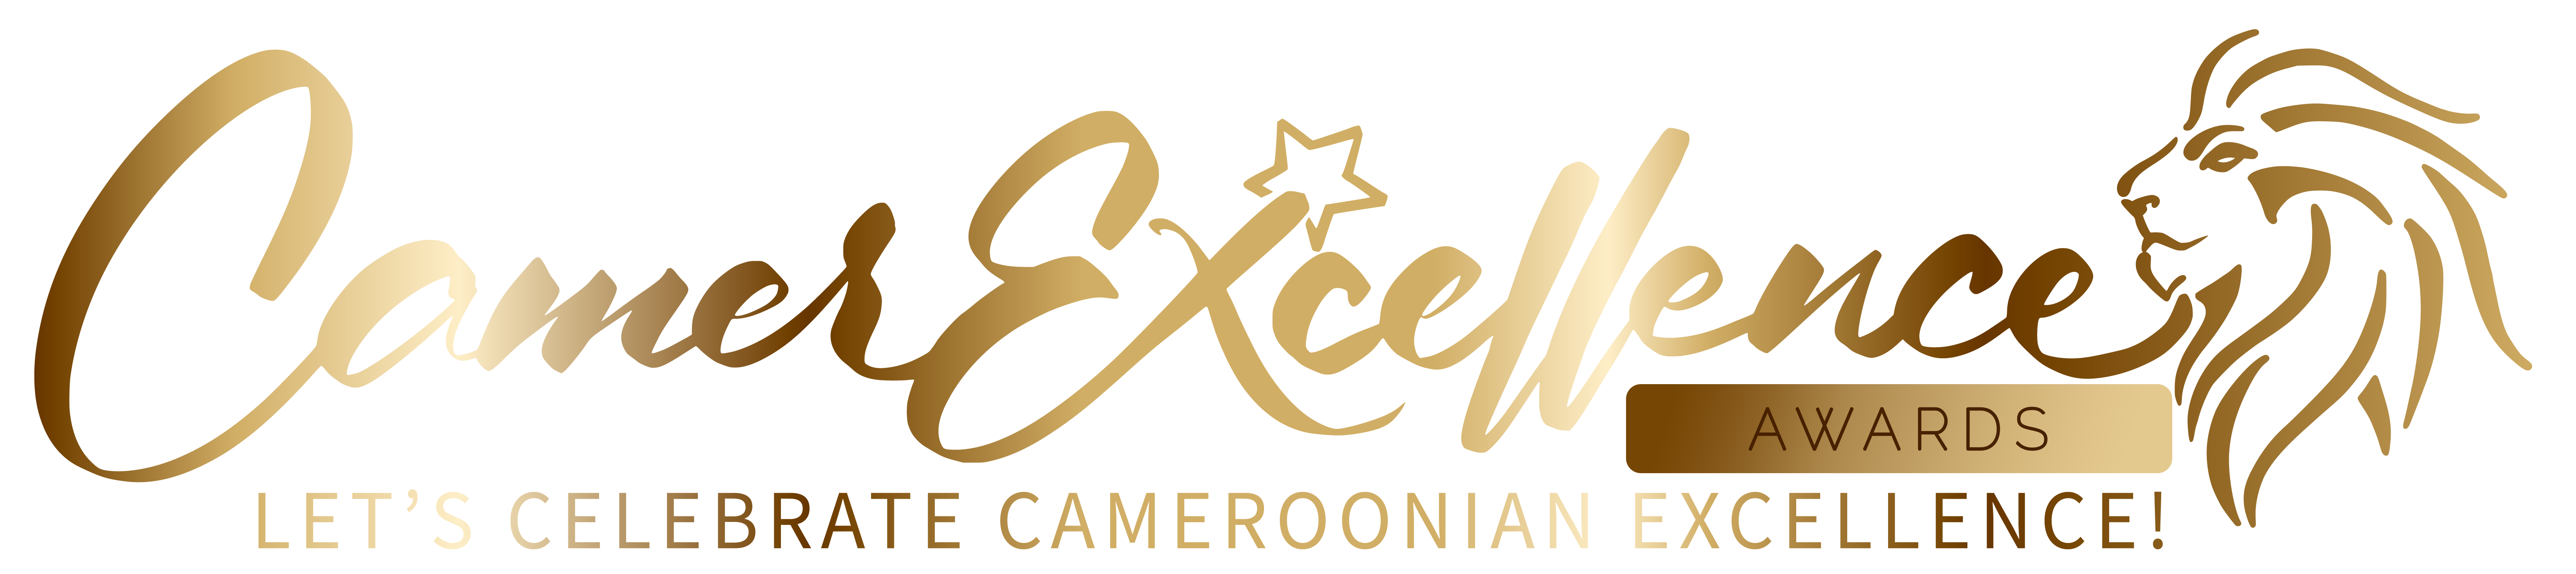 CamerExcellence Awards